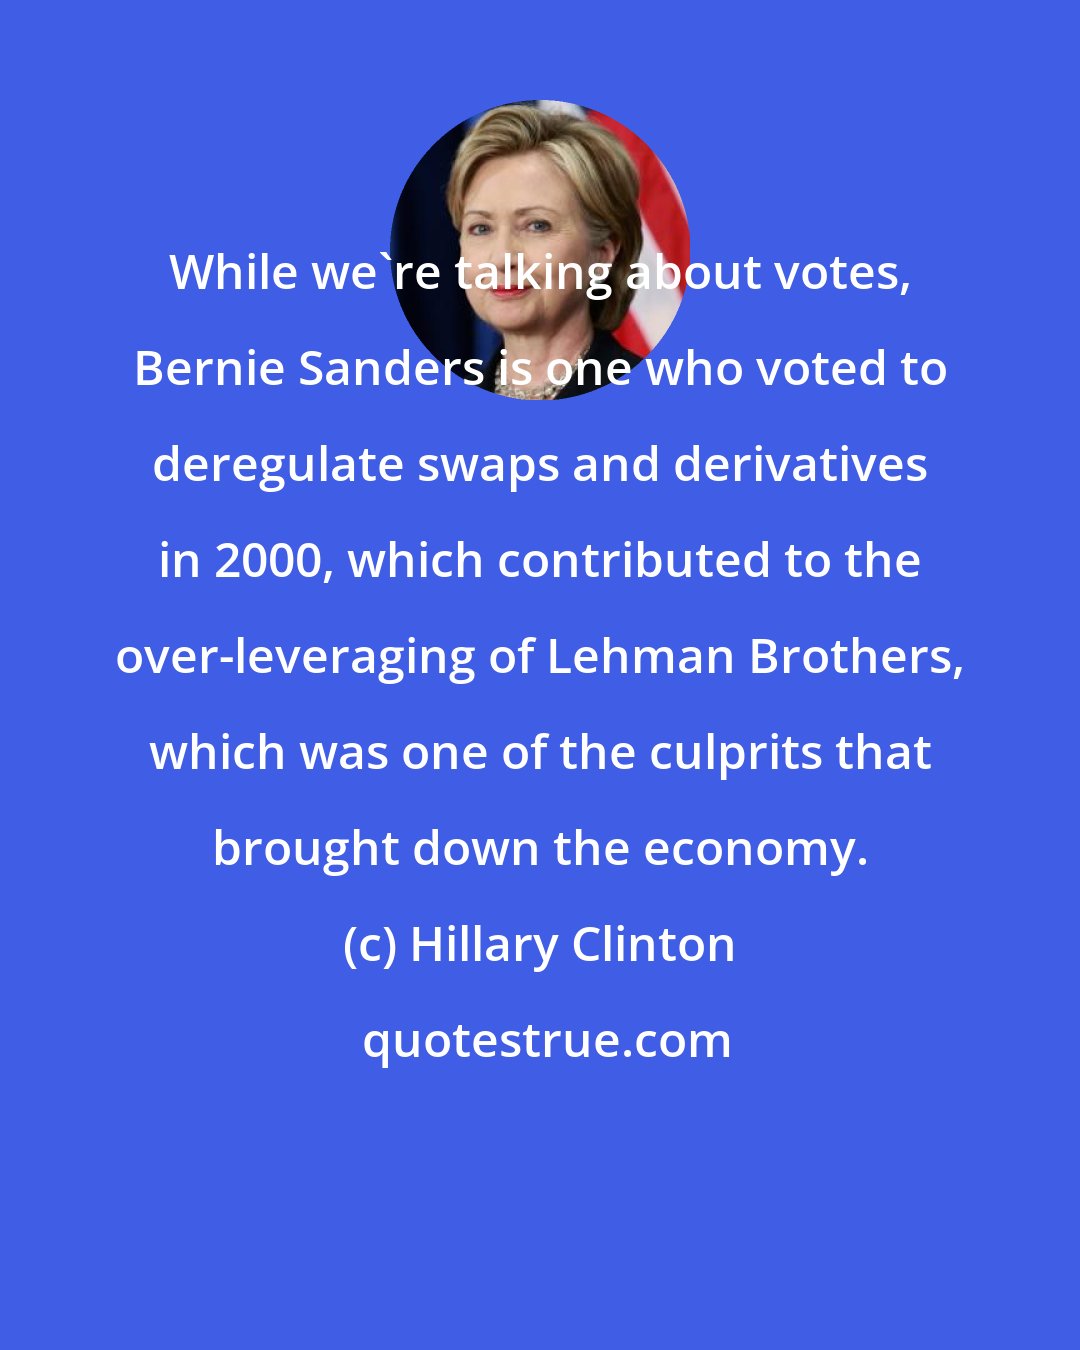 Hillary Clinton: While we're talking about votes, Bernie Sanders is one who voted to deregulate swaps and derivatives in 2000, which contributed to the over-leveraging of Lehman Brothers, which was one of the culprits that brought down the economy.